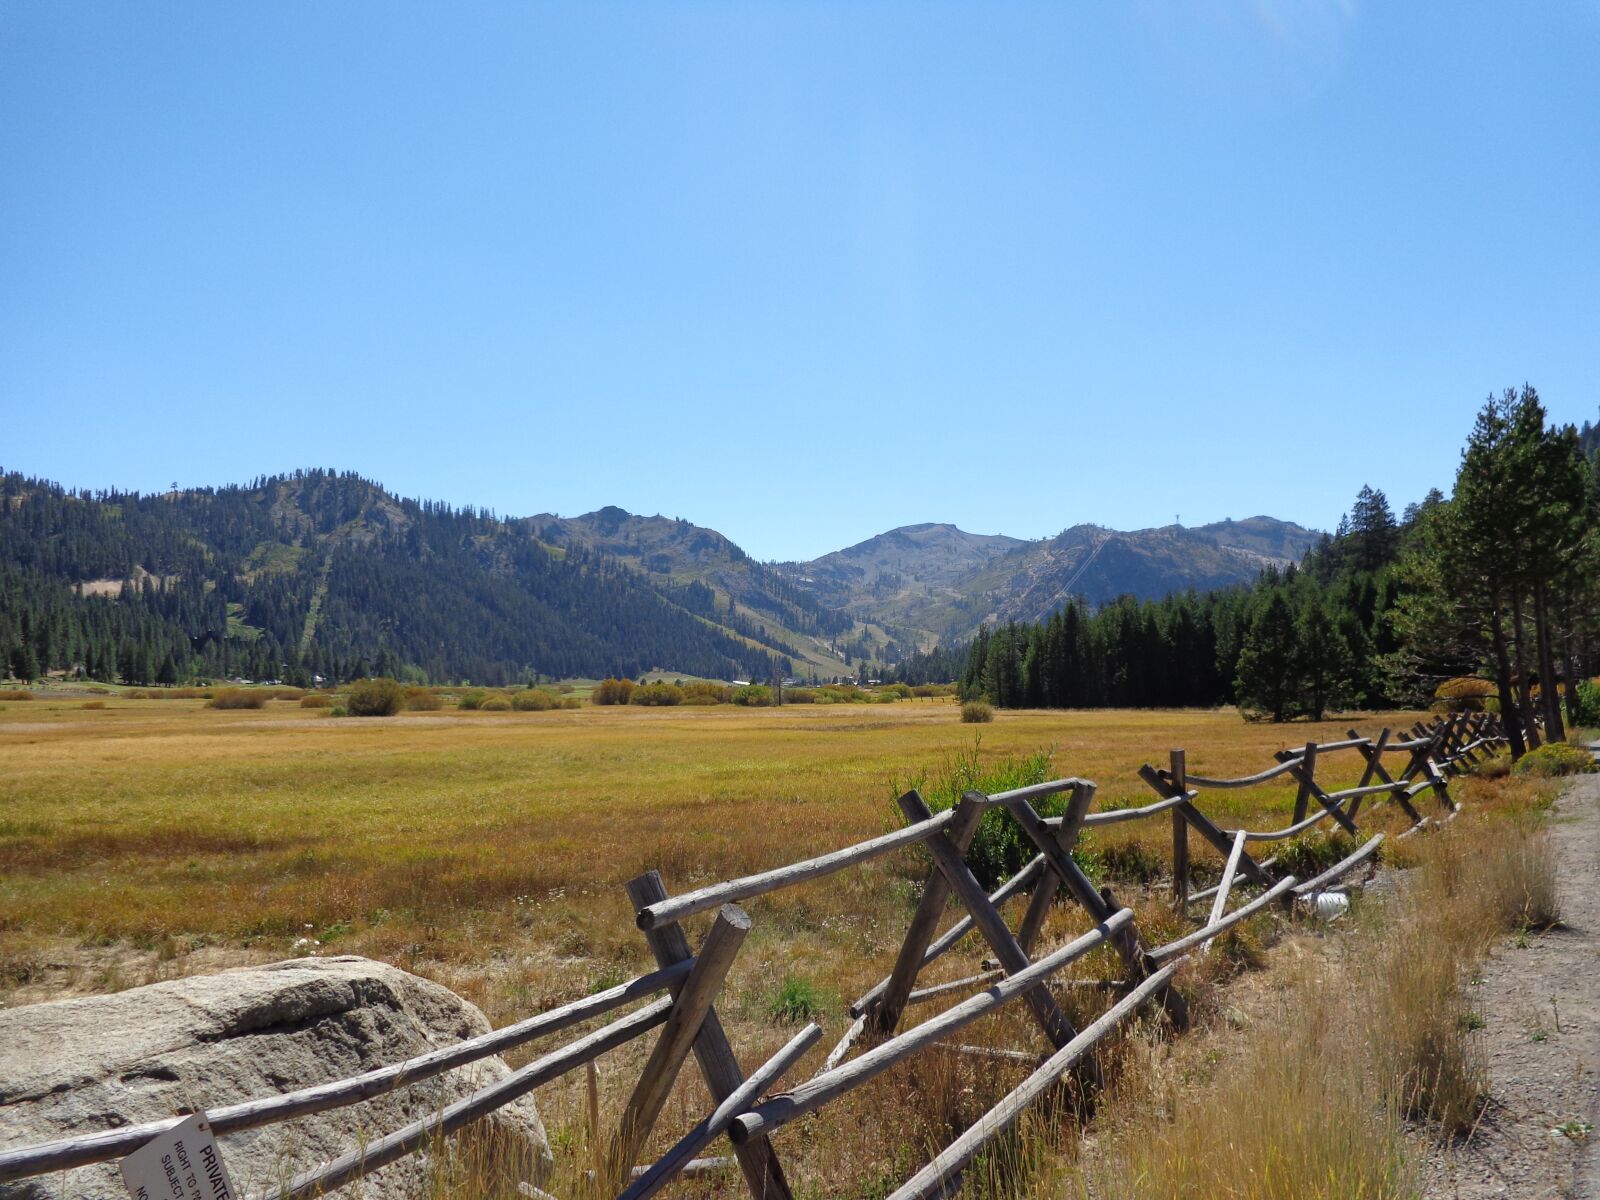 Sony DSC-W690 sample photo. "Squaw valley, fence, meadow" photography